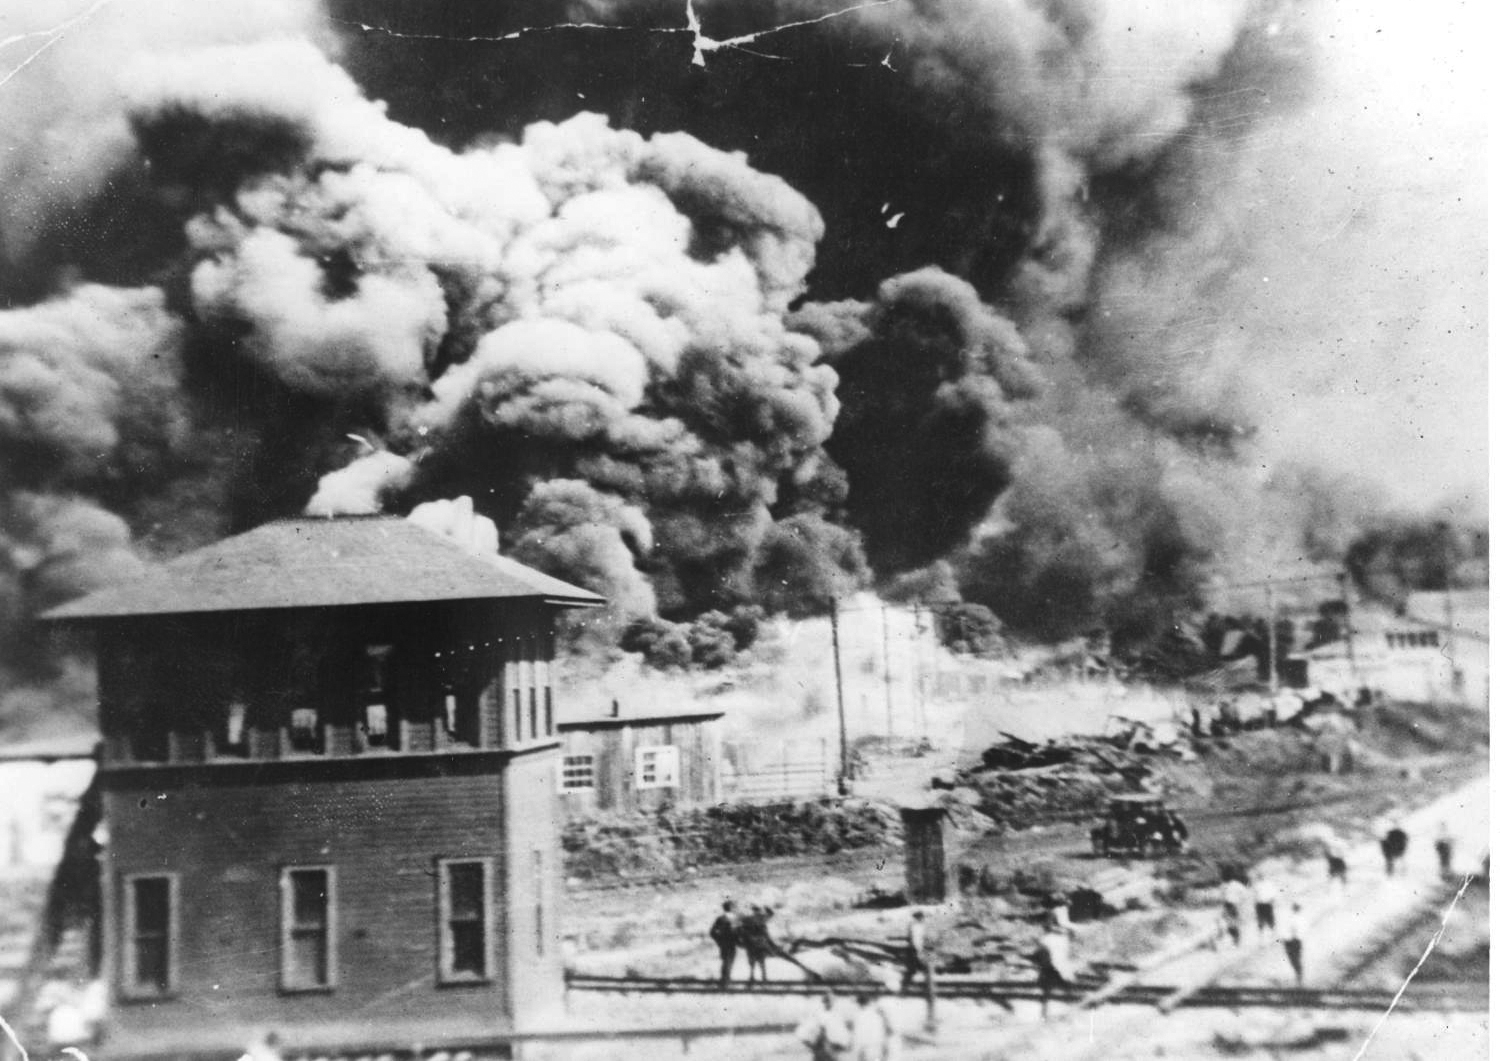 Picture of burning buildings during the Tulsa Race Massacre, 1921 